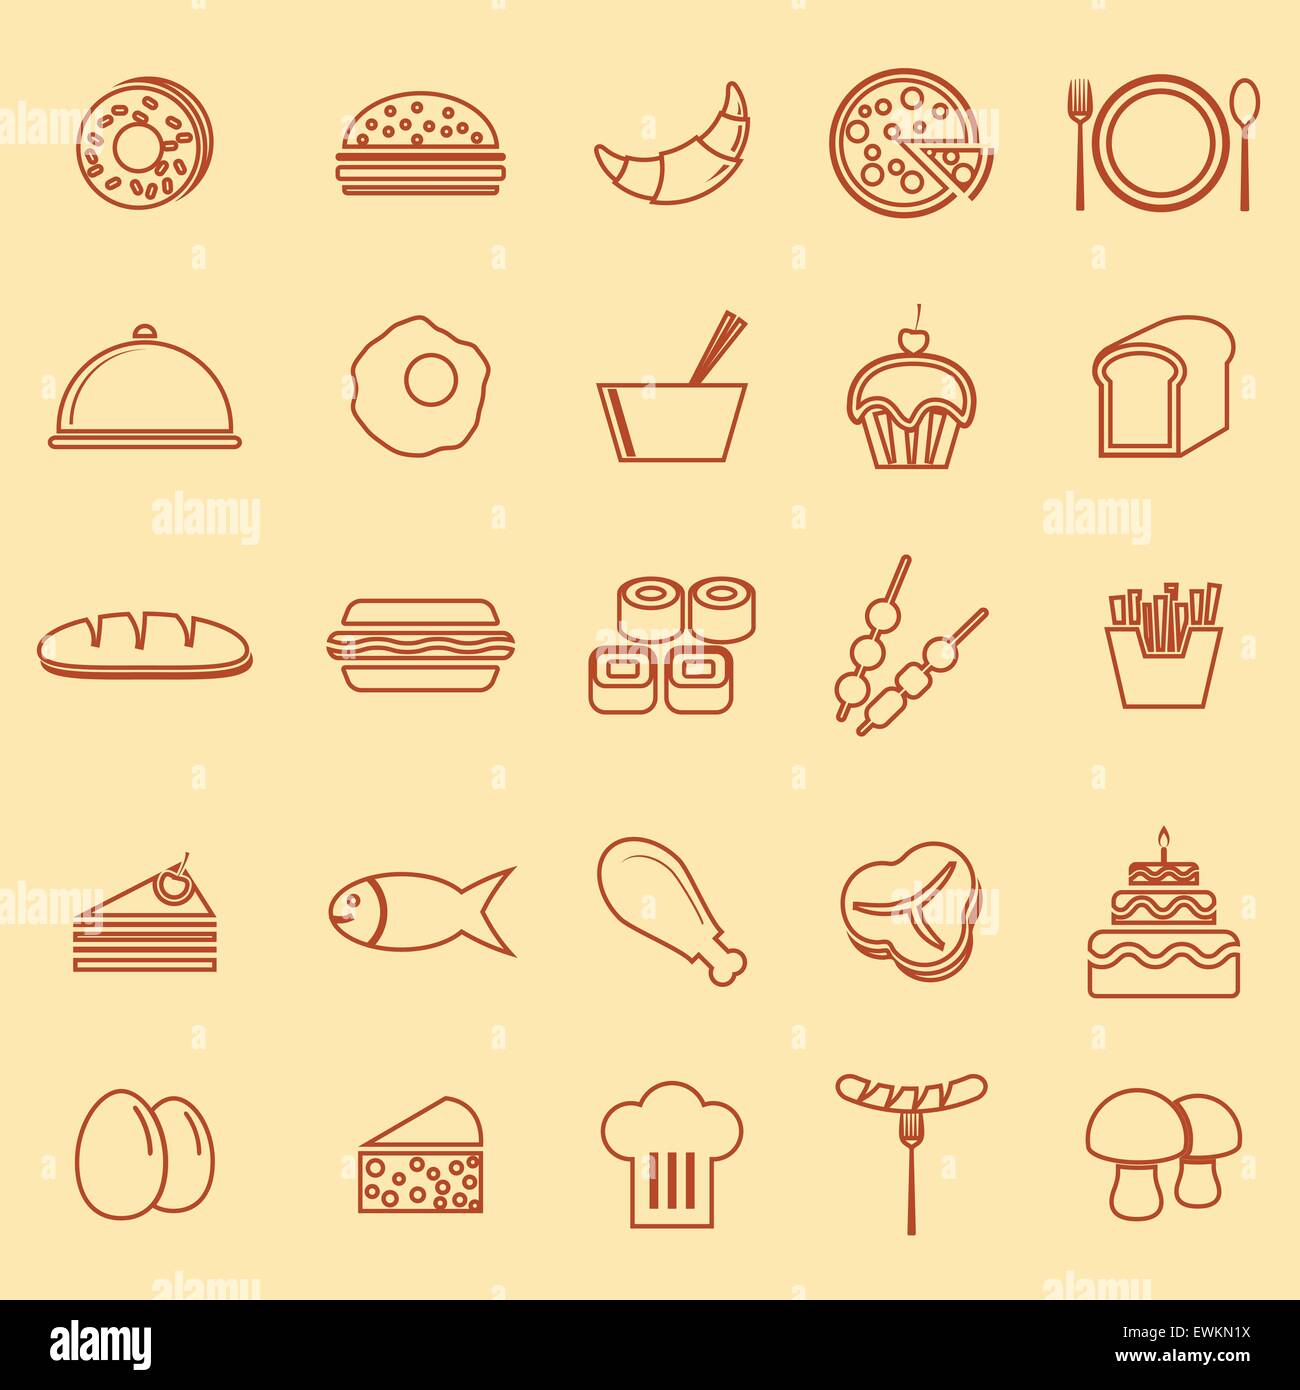 Food line icons on yellow background, stock vector Stock Vector